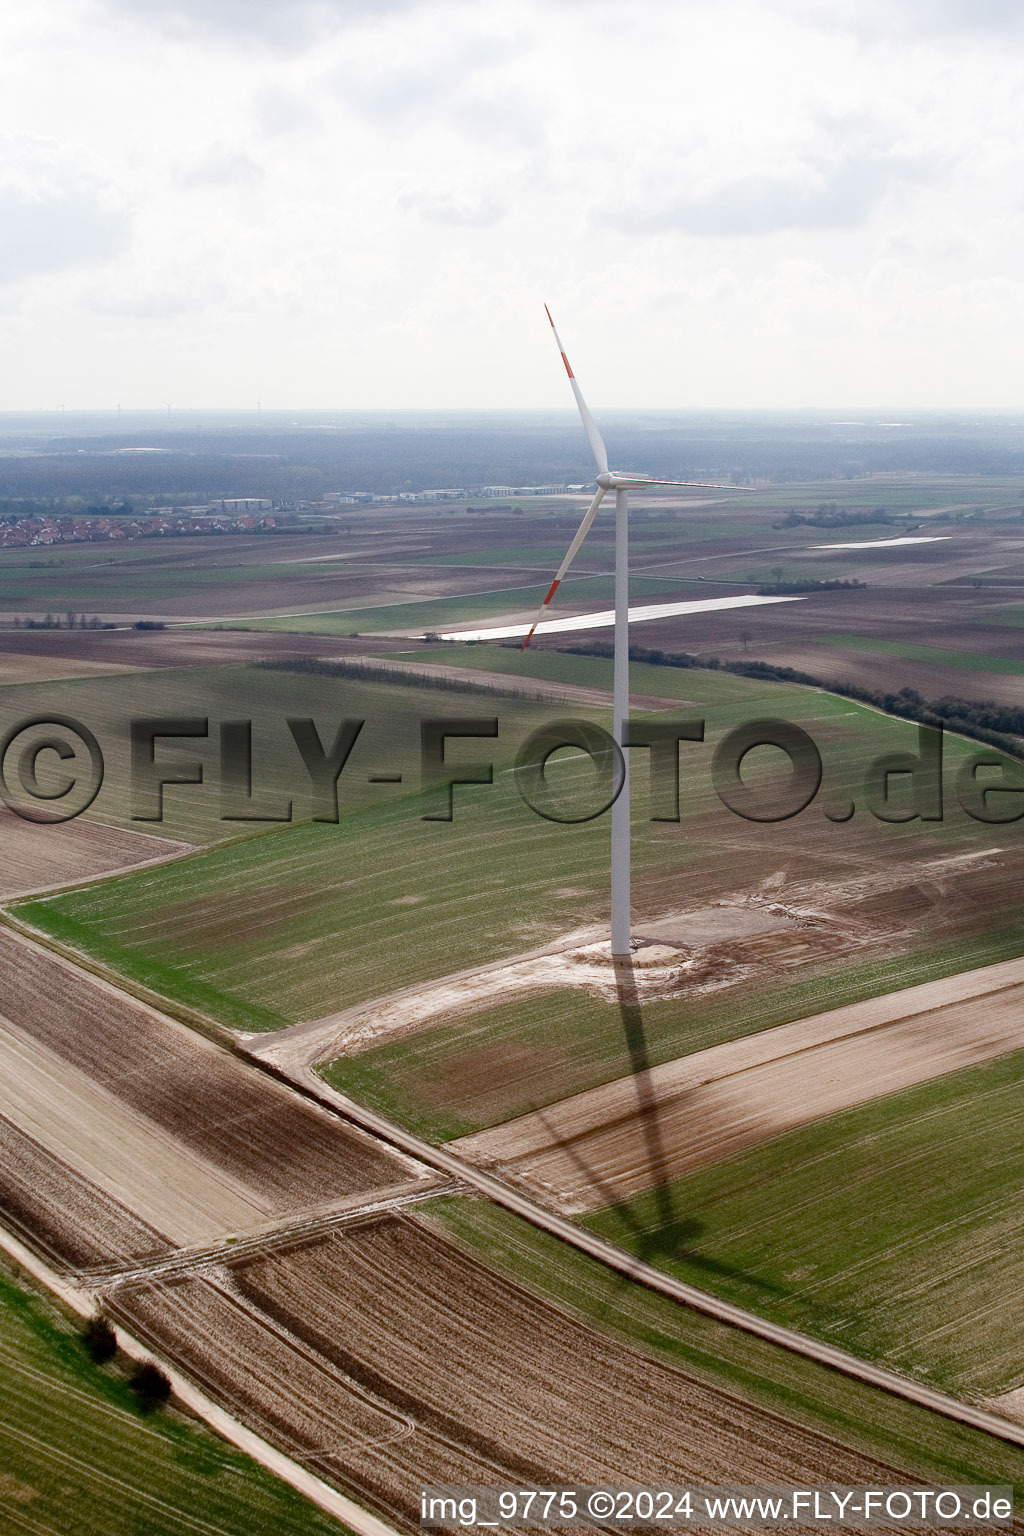 Wind turbines in Offenbach an der Queich in the state Rhineland-Palatinate, Germany seen from above